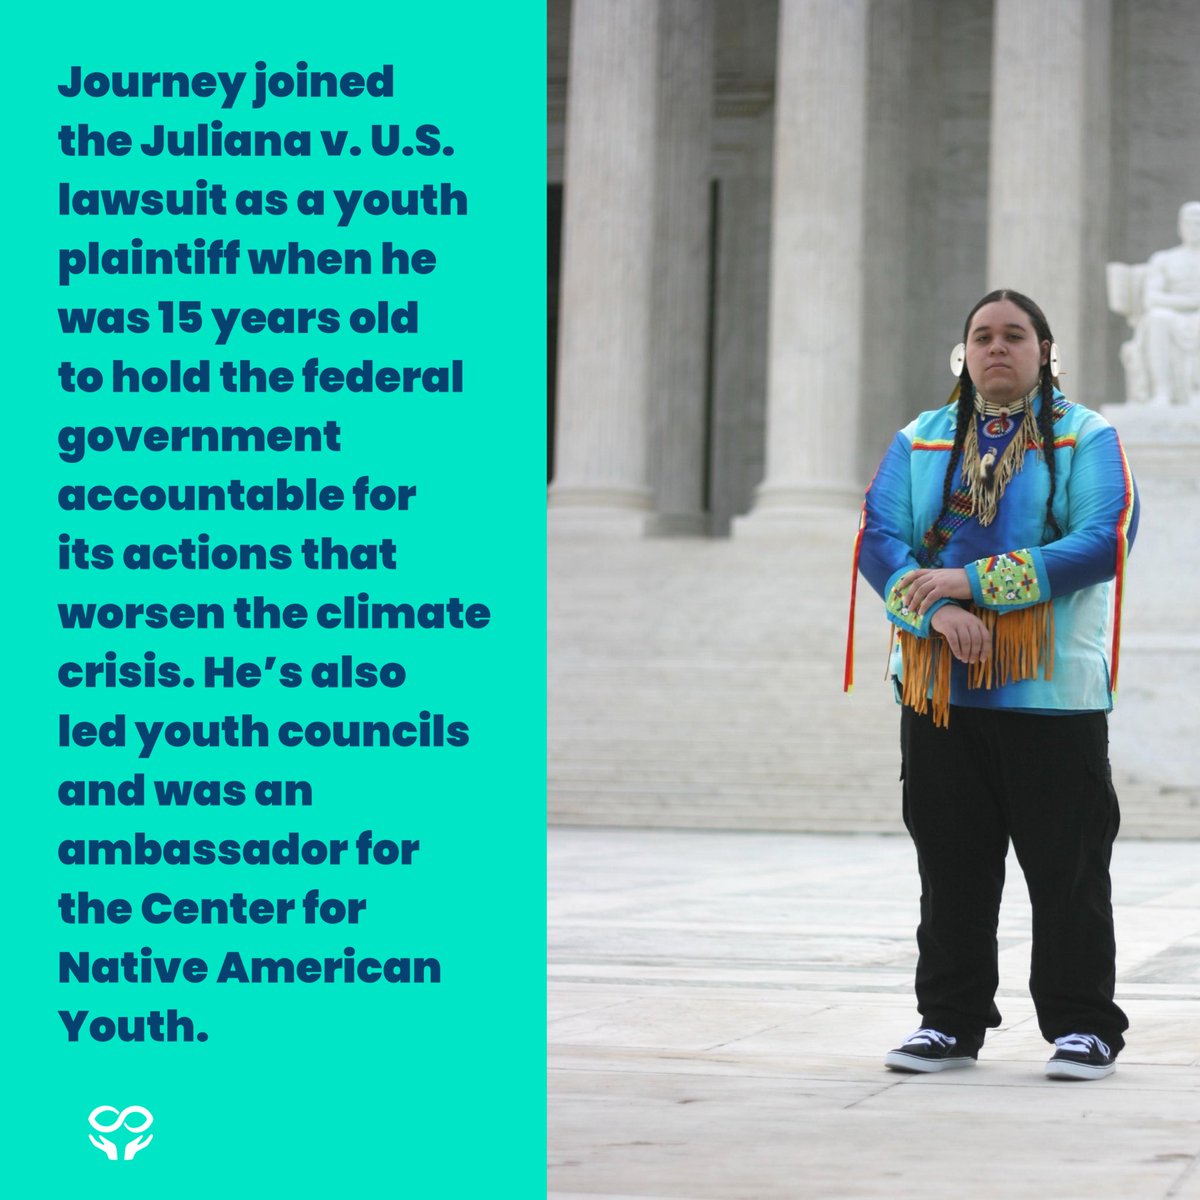 Journey has been fighting in this lawsuit for nearly 9 years and Biden’s @TheJusticeDept is doing everything it can to prevent a trial. Join us on April 21st at 1pm in front of the White House for a rally to #SaveJuliana! RSVP: bit.ly/JulianaRally #YouthvGov